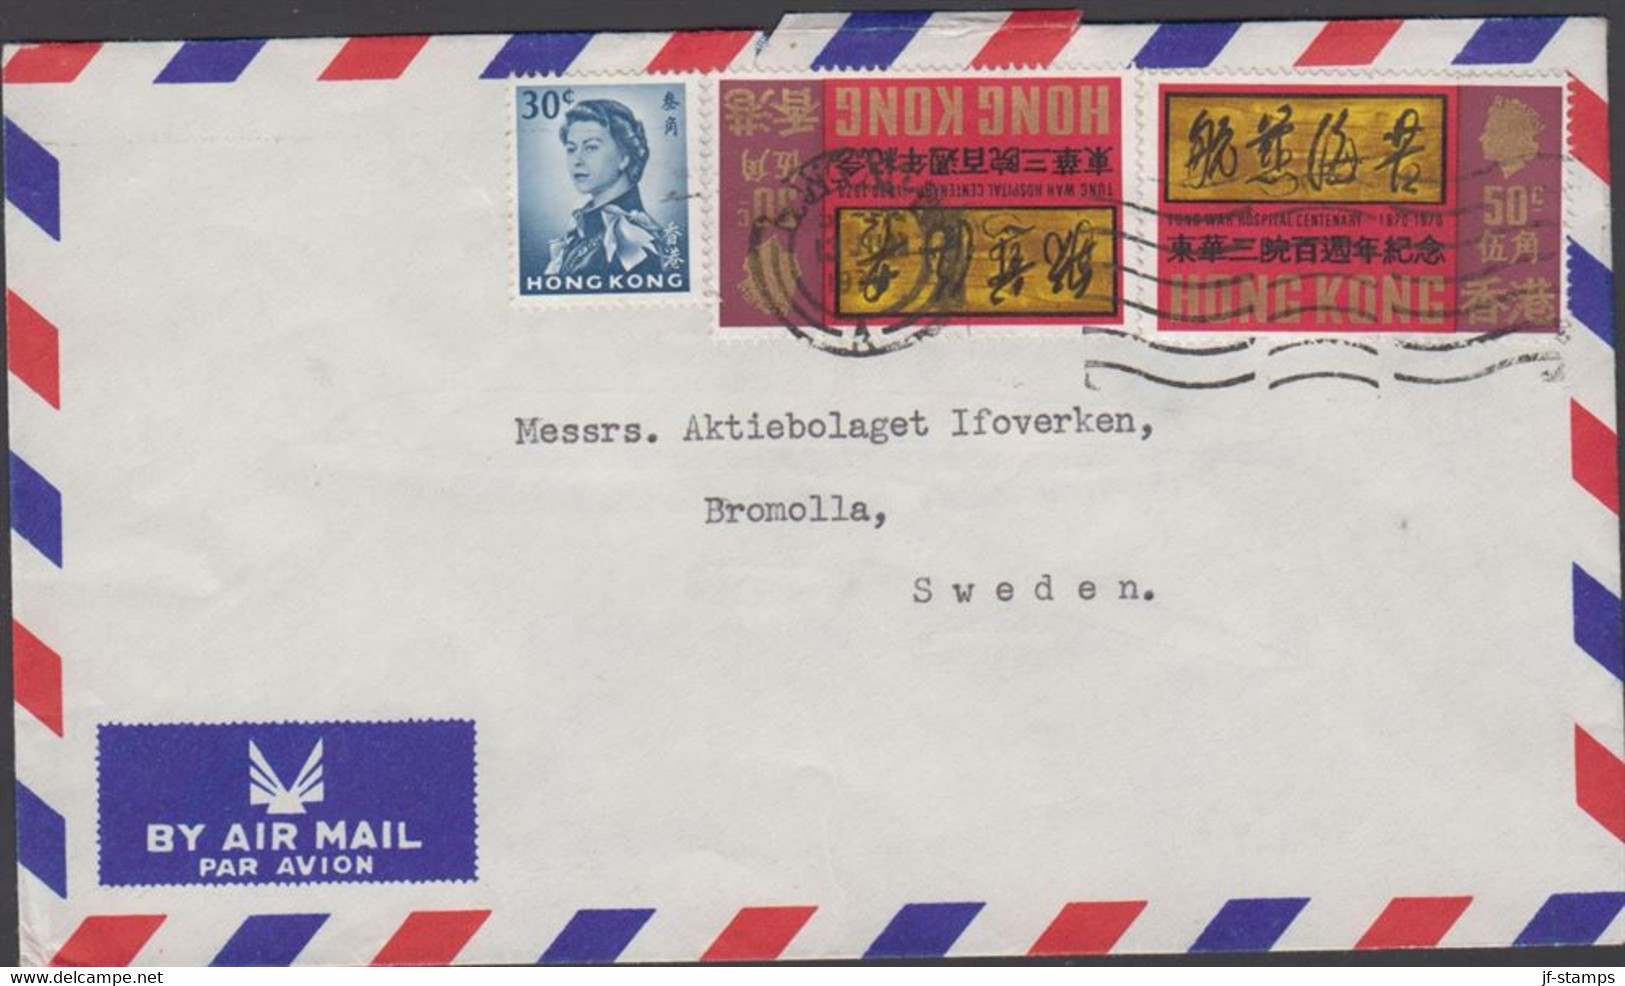 1970. HONG KONG. 30 C Elizabeth + 2 Ex 50 C TUNG WAH HOSPITAL  On AIR MAIL Cover To Bromolla... (Michel 251+) - JF427103 - Covers & Documents